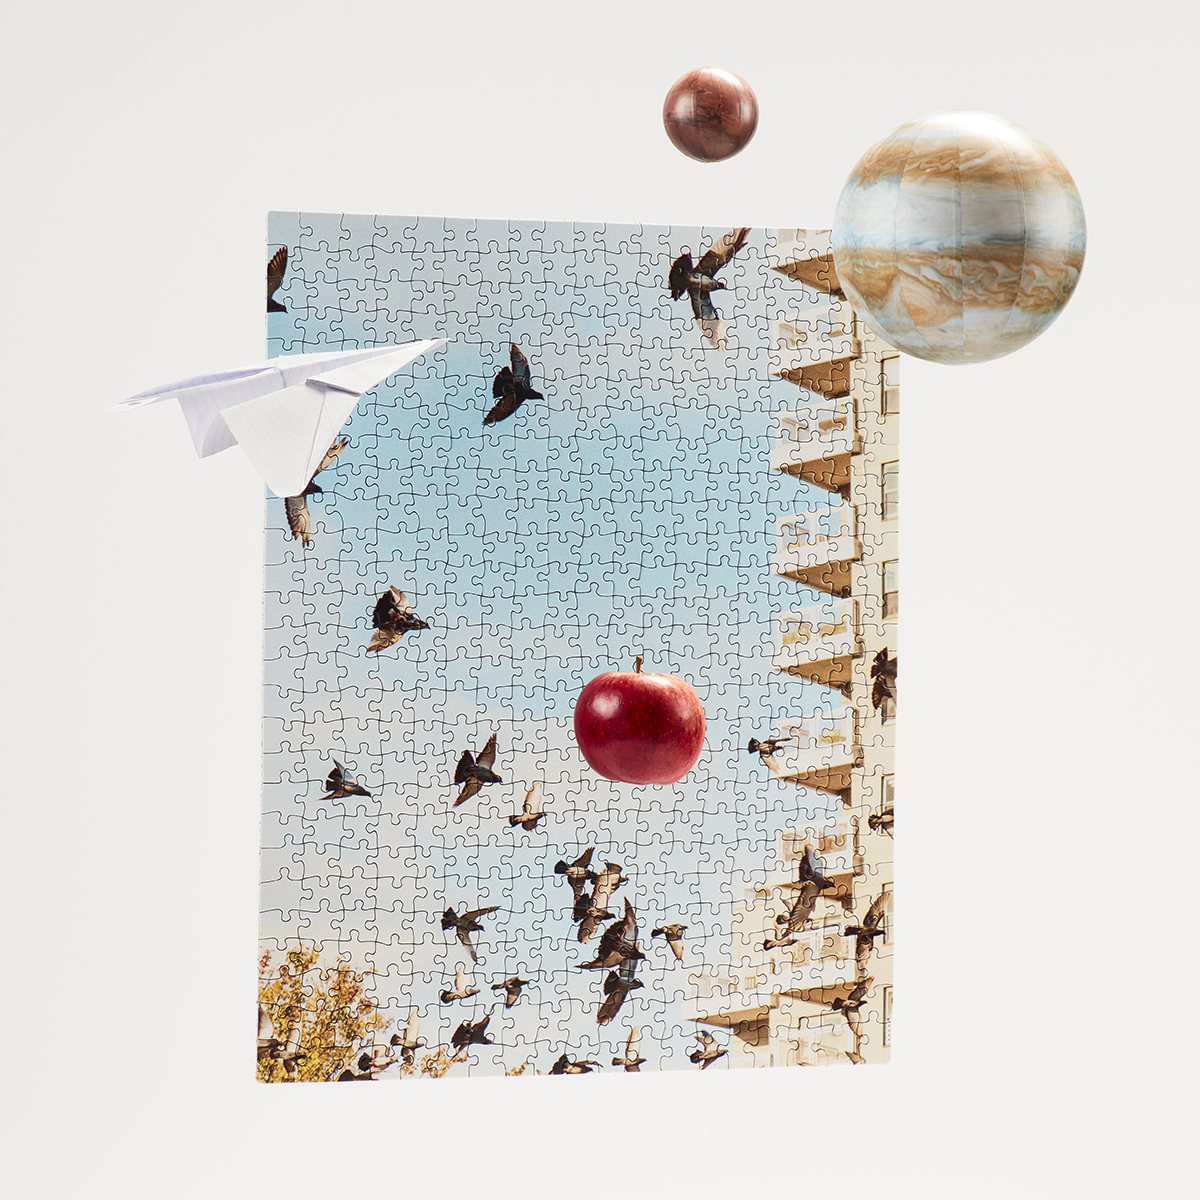 Still life of paper airplane flying towards floating plants and a falling apple against a puzzle backdrop of the sky.